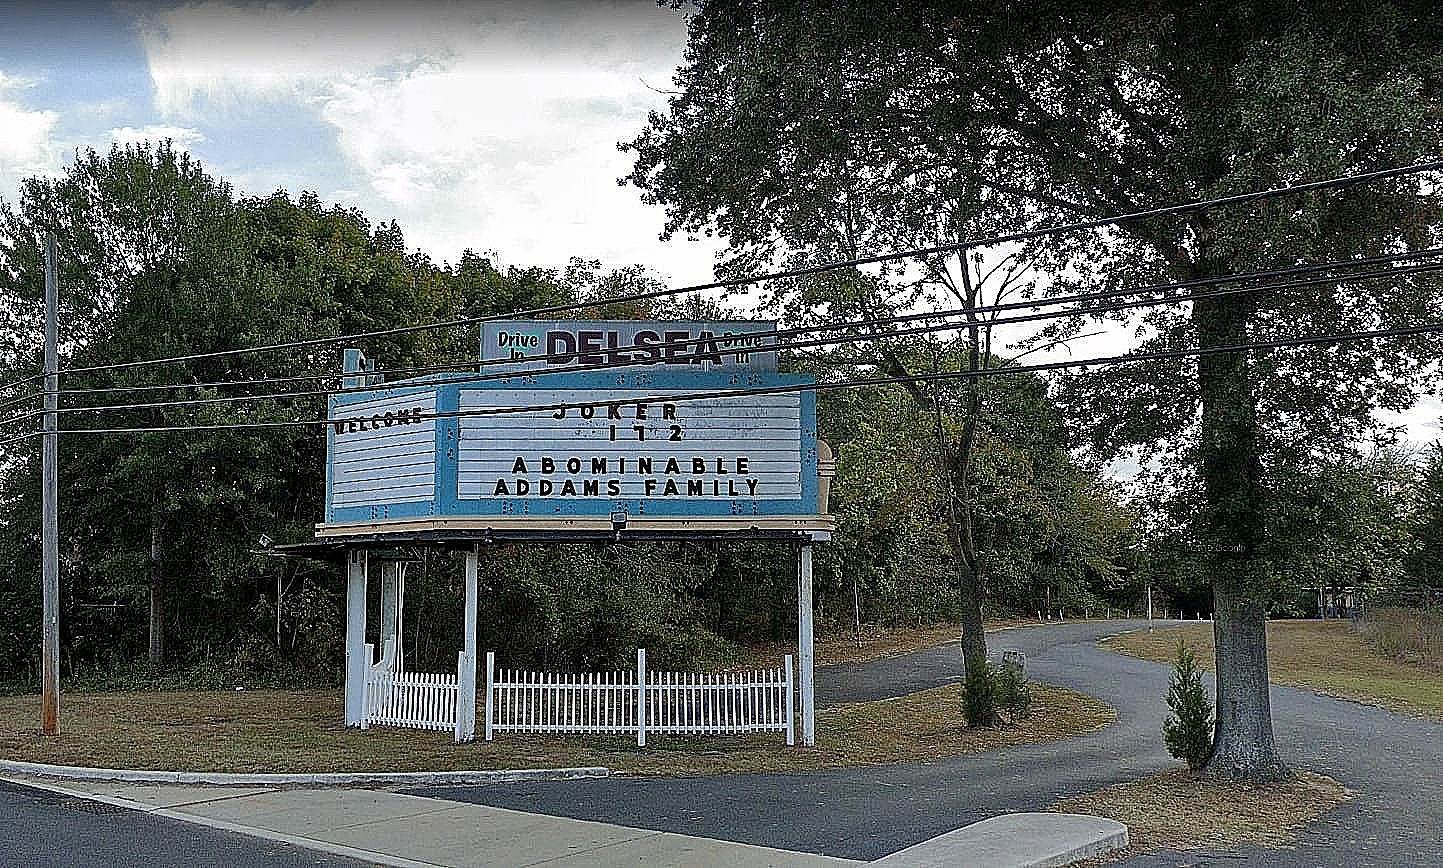 For Fun And Fright, Lots To See at Vineland NJs Delsea Drive-In picture